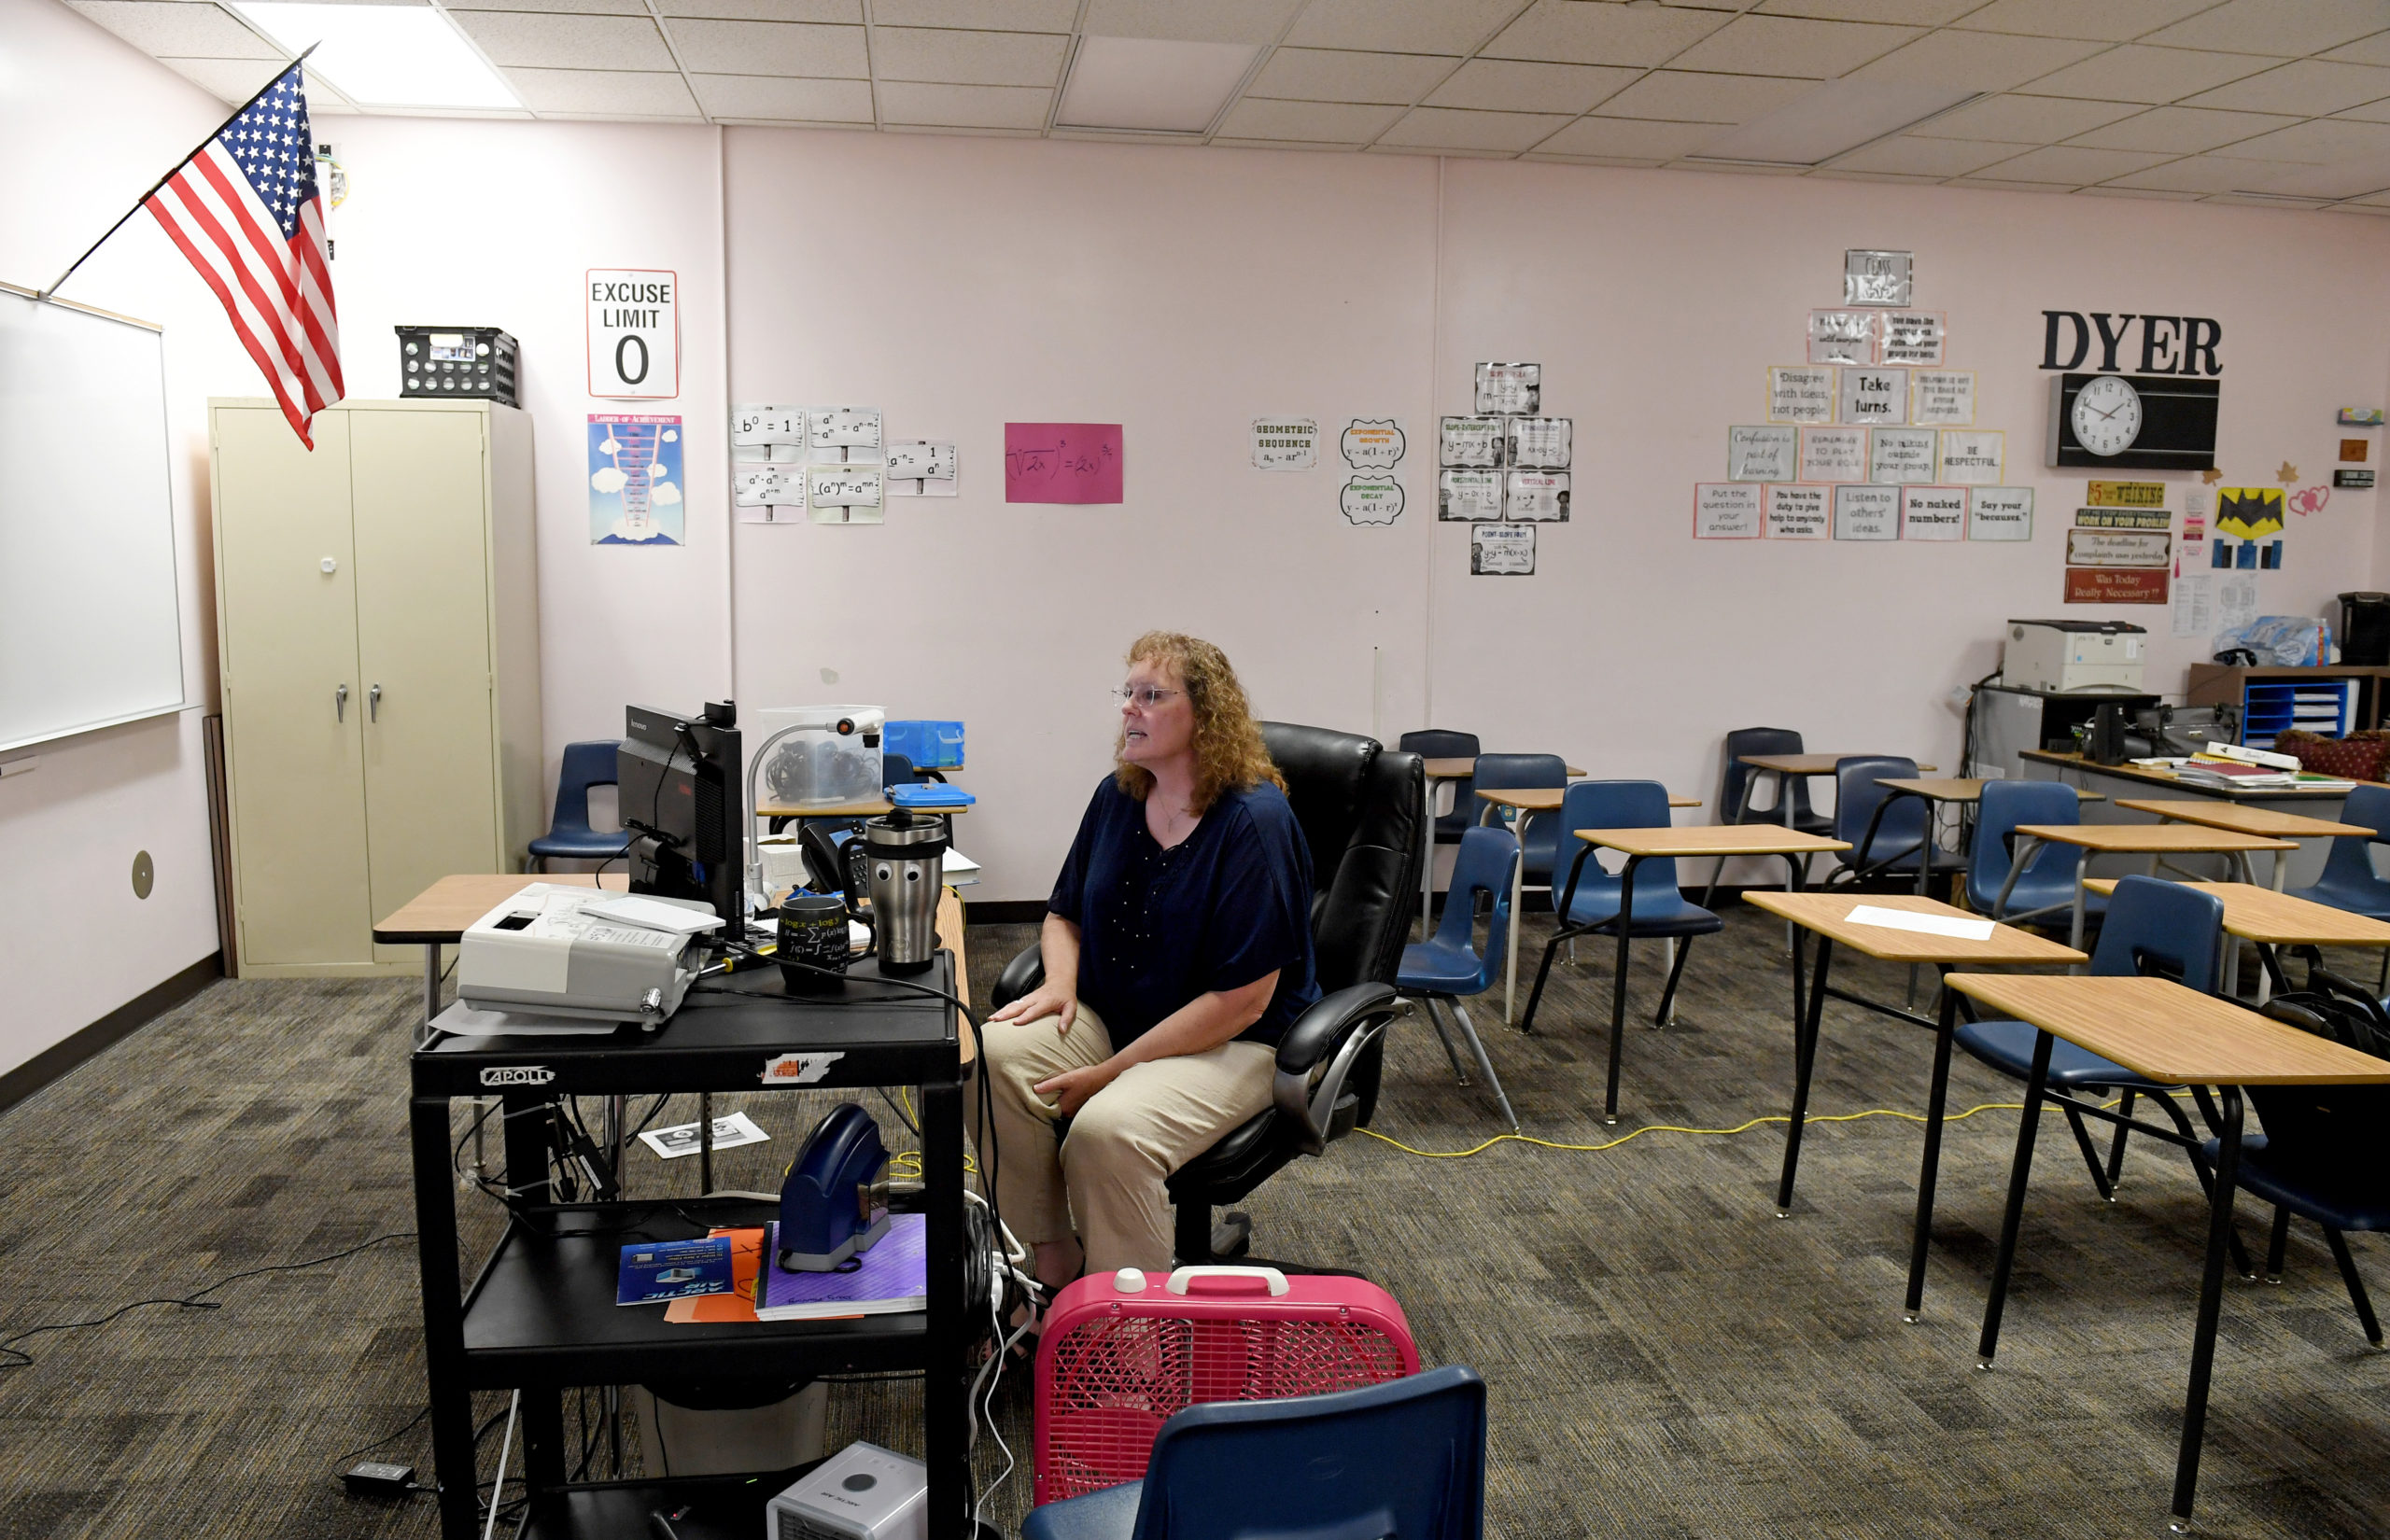 LAS VEGAS, NEVADA - AUGUST 24: Dana Dyer teaches an online seventh grade algebra class from her empty classroom at Walter Johnson Junior High School on the first day of distance learning for the Clark County School District amid the spread of the coronavirus (COVID-19) on August 24, 2020 in Las Vegas, Nevada. CCSD, the fifth-largest school district in the United States with more than 315,000 students, decided to start the school year with a full-time distance education instructional model as part of its Reopening Our Schools Plan due to health and safety concerns over the pandemic. (Photo by Ethan Miller/Getty Images)